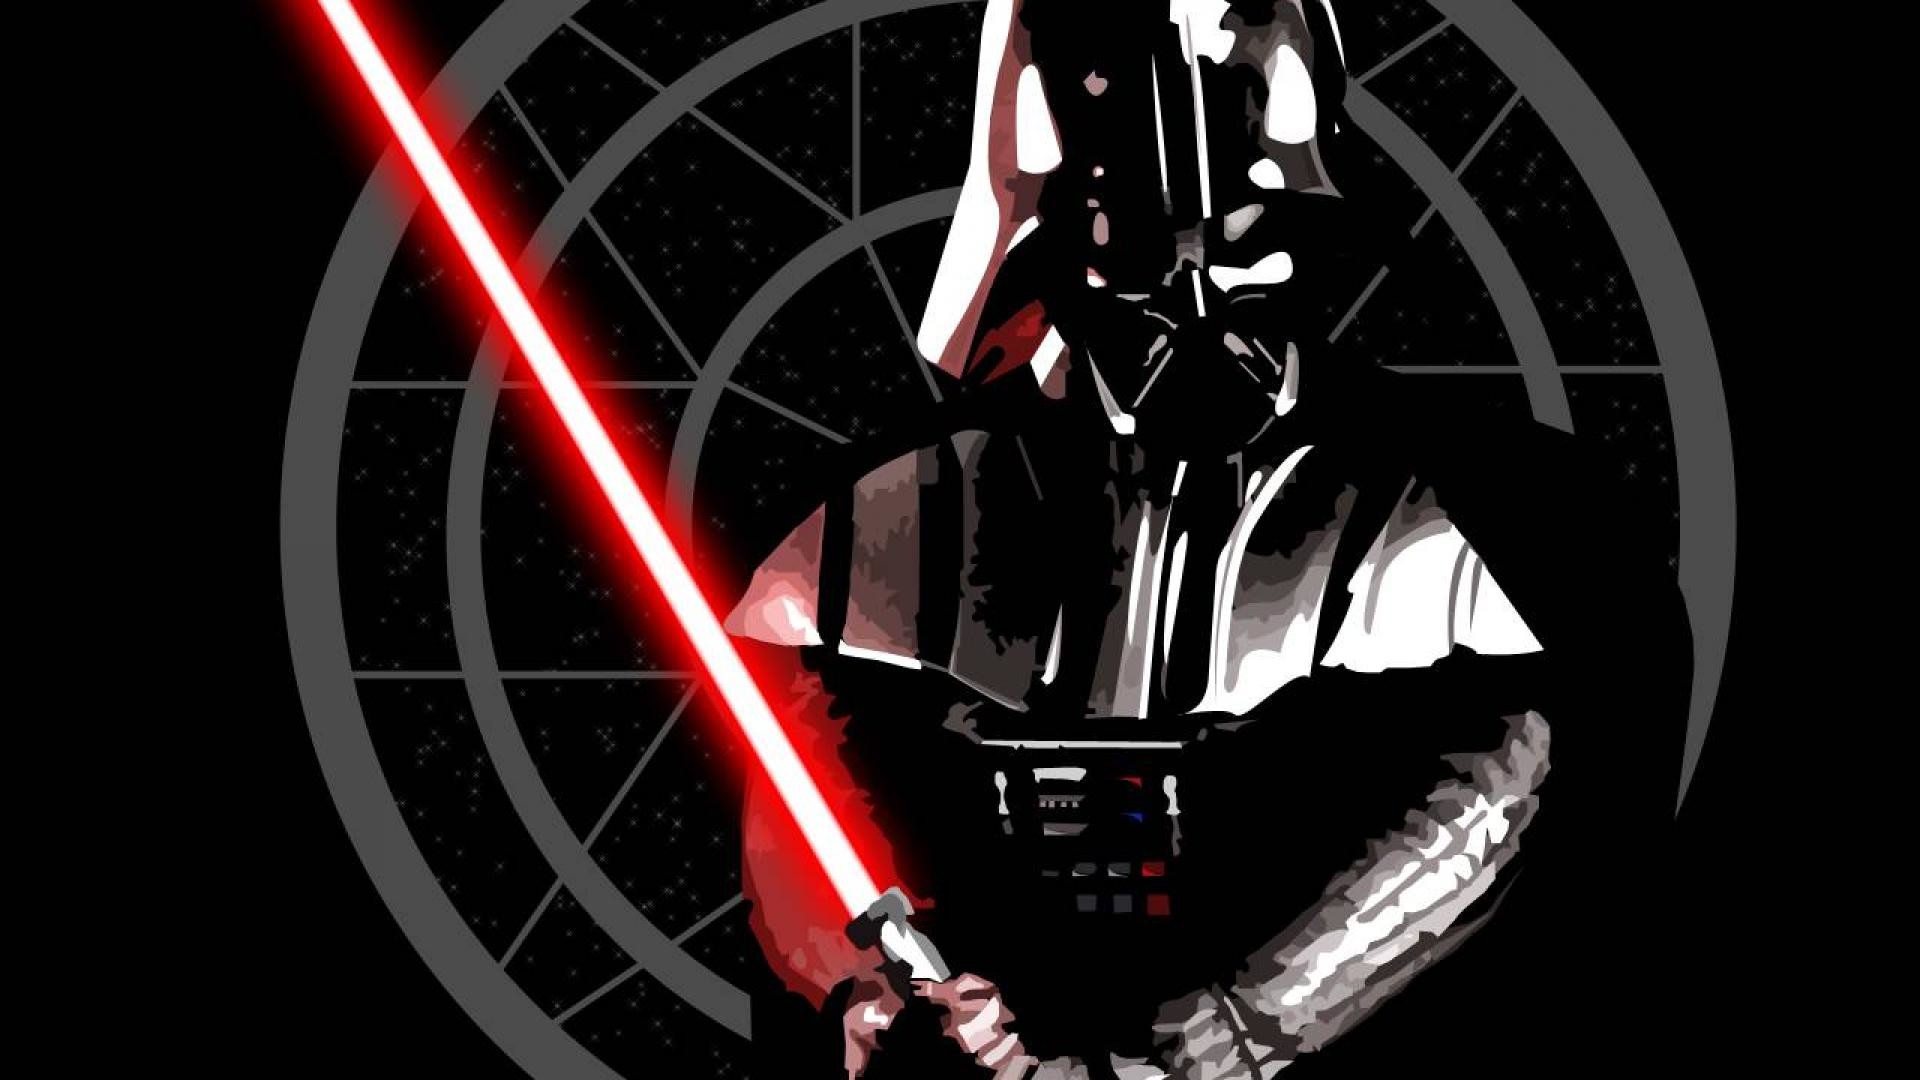 … darth vader hd wallpapers cly wallpapers hd …